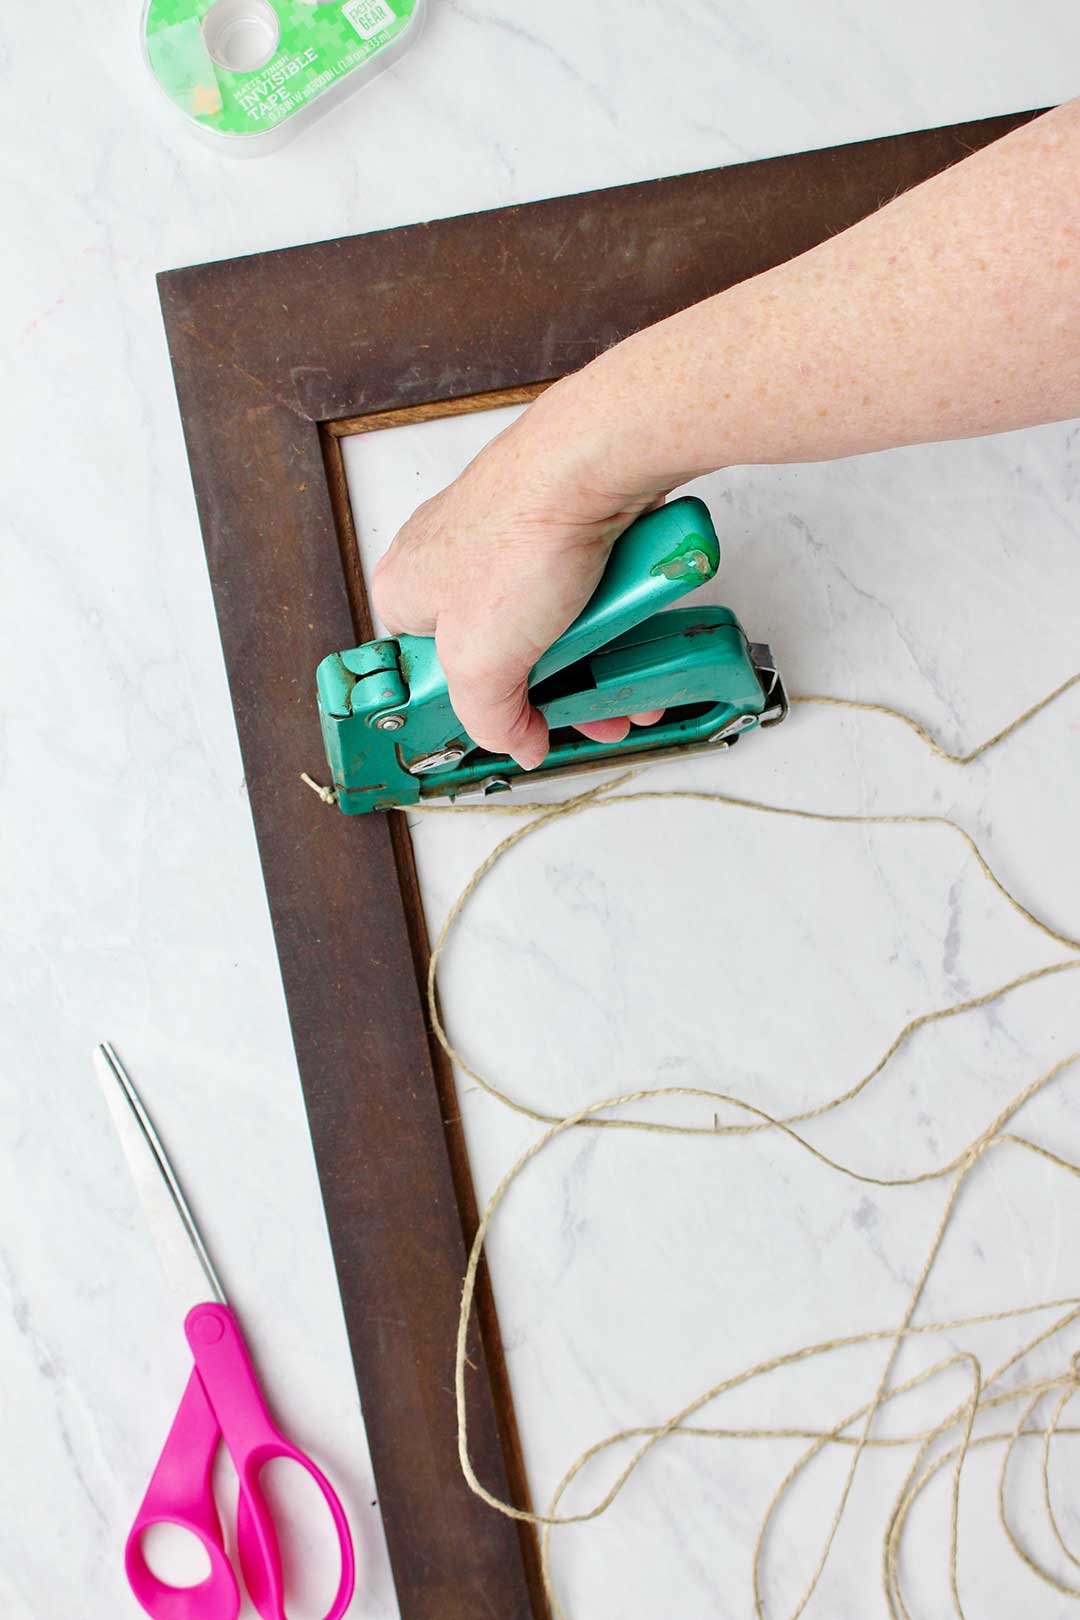 Hand attaching twine to the back of a wooden photo frame with a green staple gun with pink scissors and tape near by.